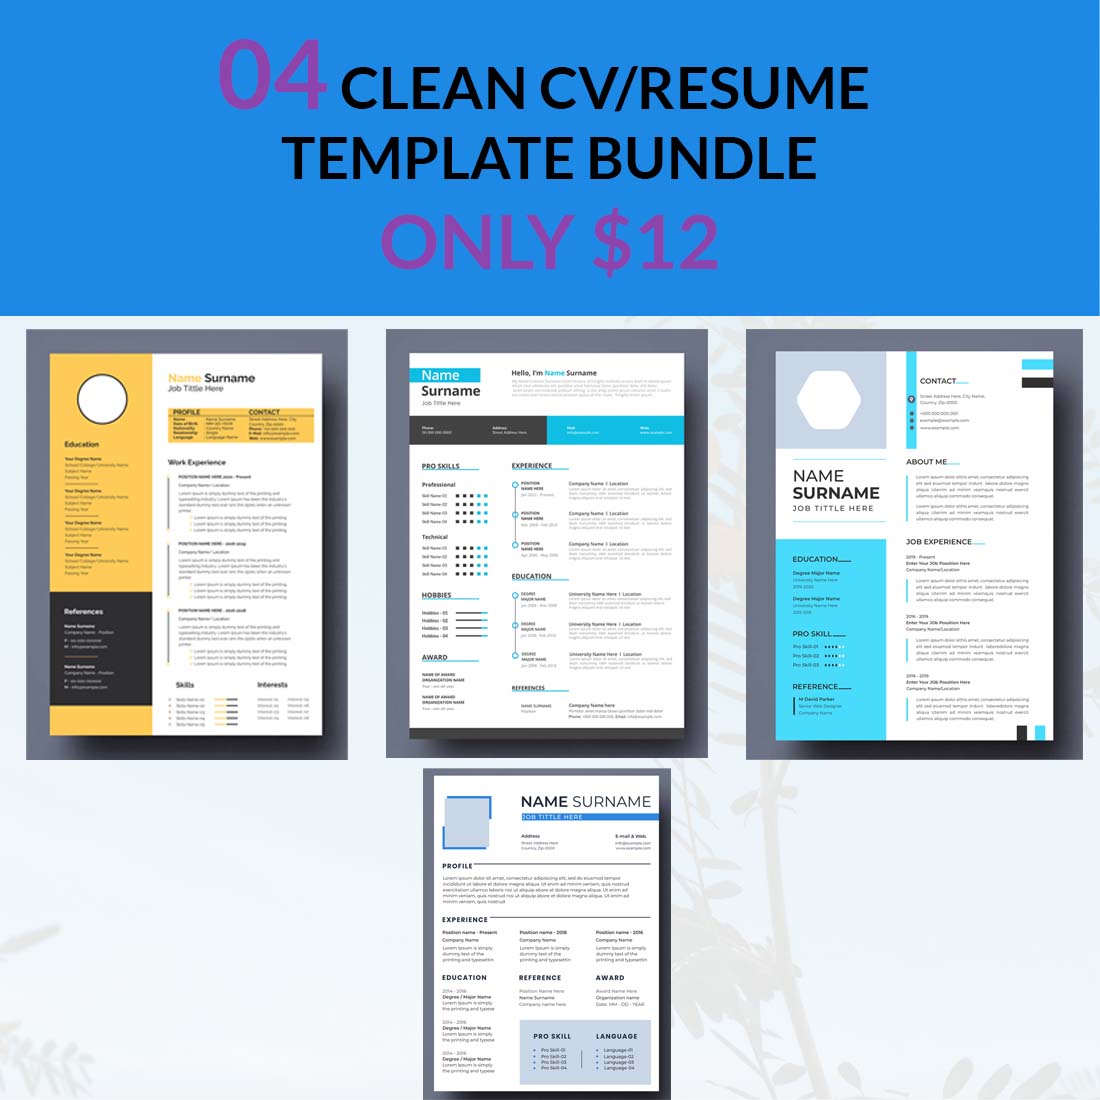 04 CLEAN CV/RESUME TEMPLATE BUNDLE ONLY $12 preview image.